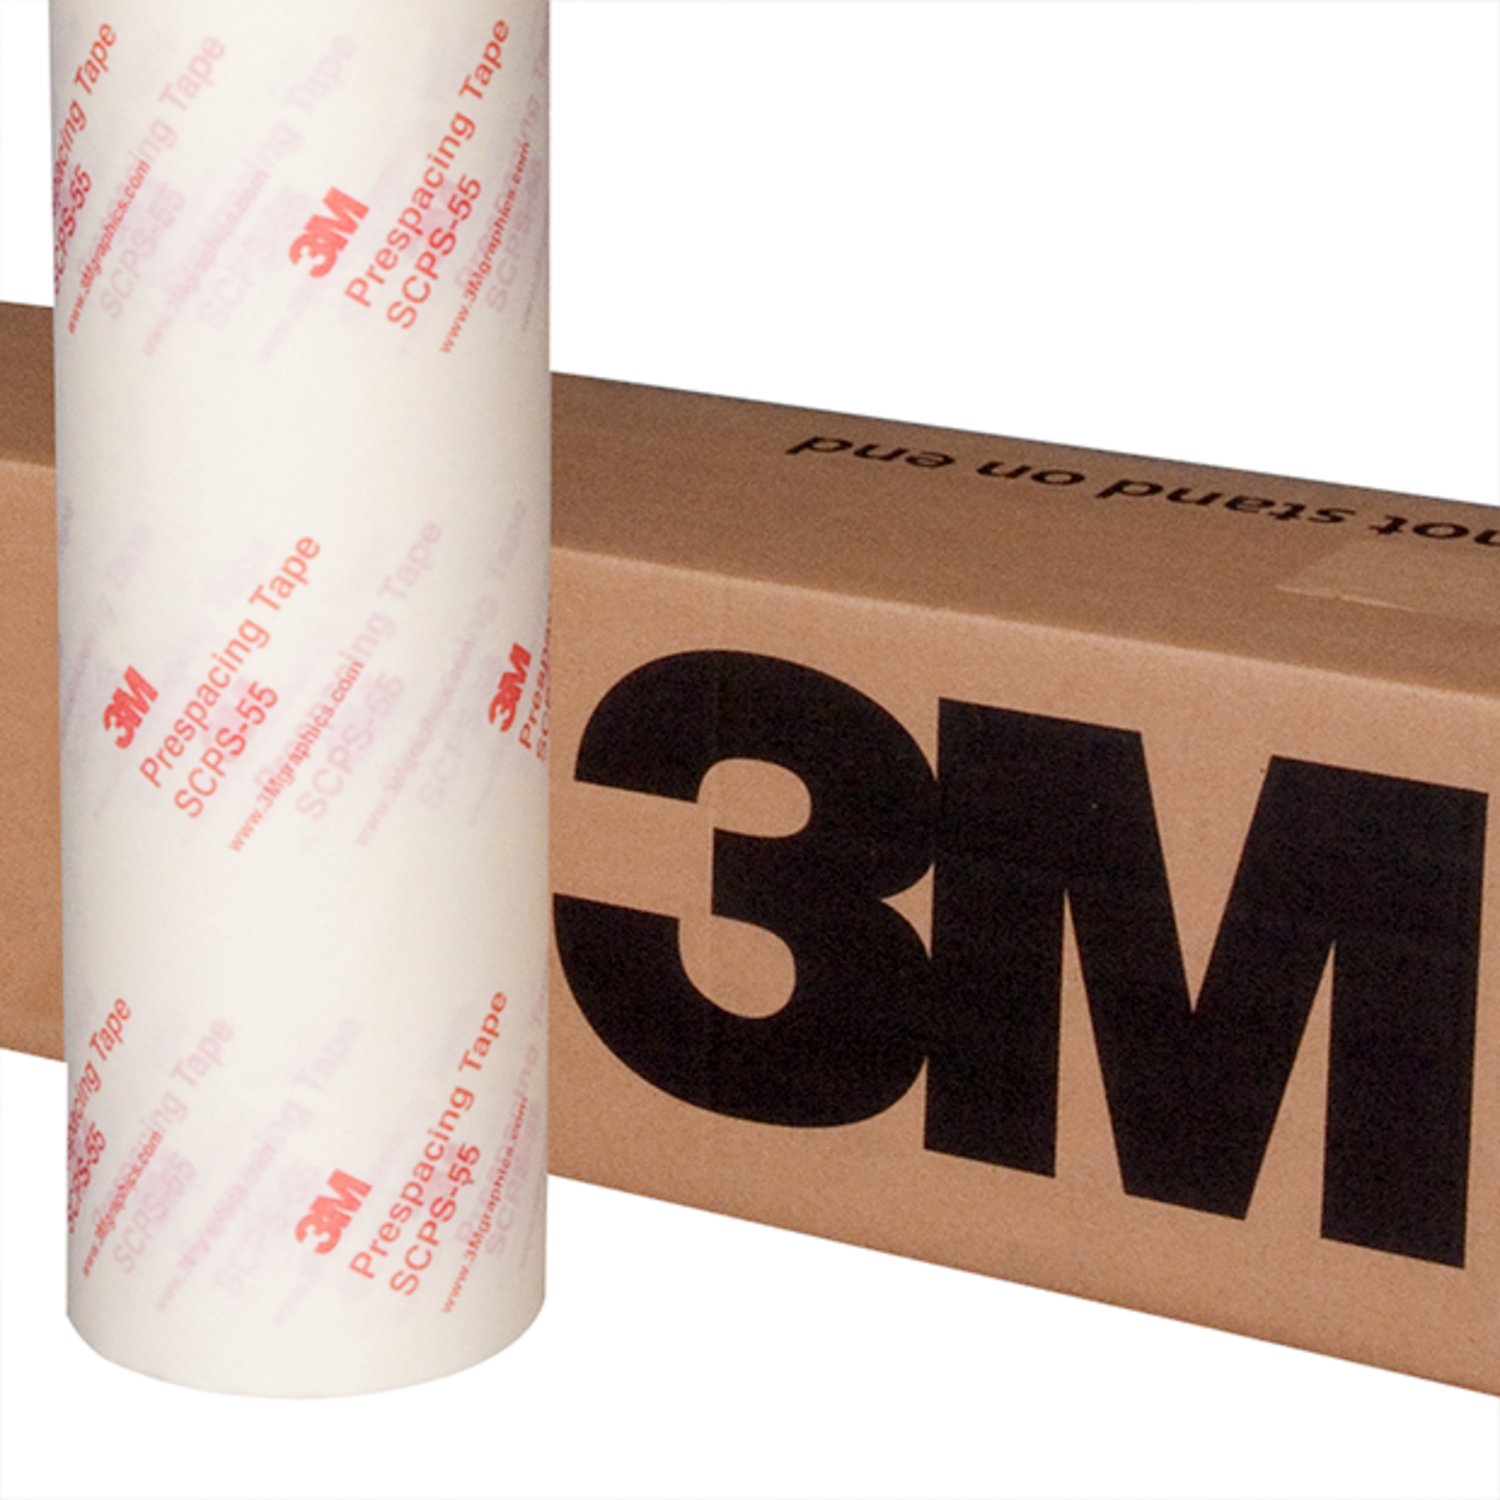 7000130181 - 3M Prespacing Tape SCPS-55, 24 in x 100 yd, 1 Roll/Case